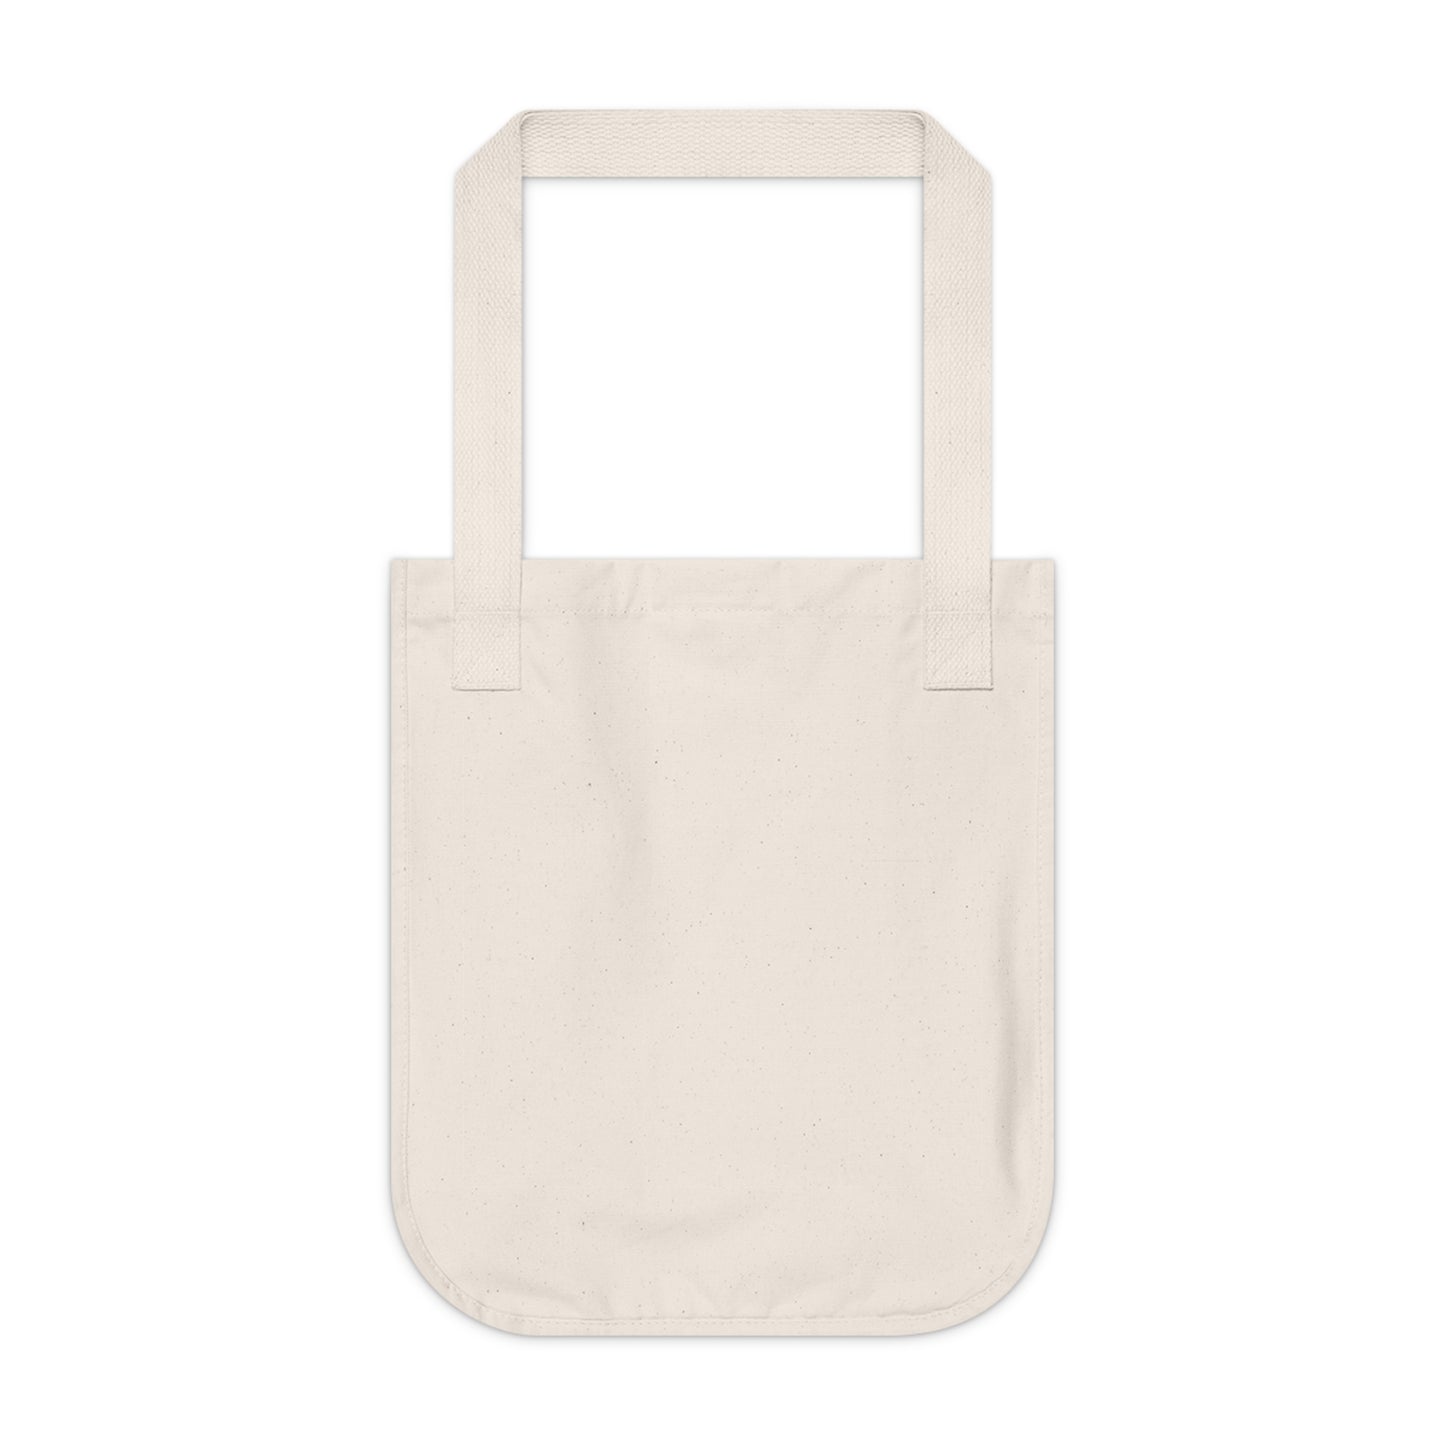 "Exploring Unity in Diversity: A Mixed Media Collage" - Bam Boo! Lifestyle Eco-friendly Tote Bag